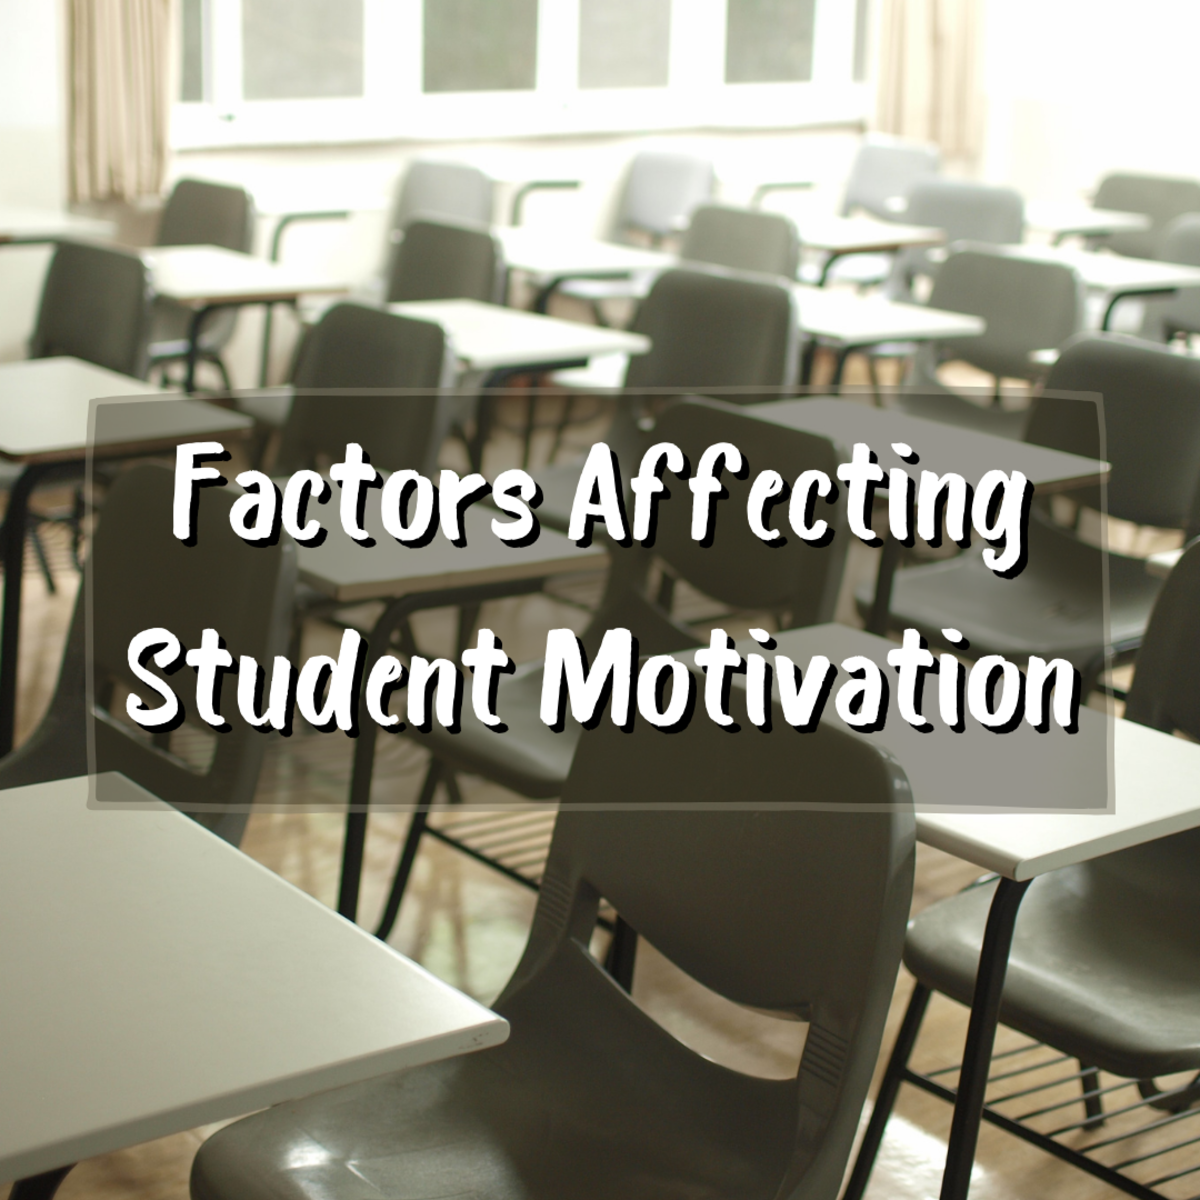 Read on to learn about the various factors that affect student motivation, including the many extrinsic motivational factors in students' lives, such as home environment, peer influence, and teacher motivation.